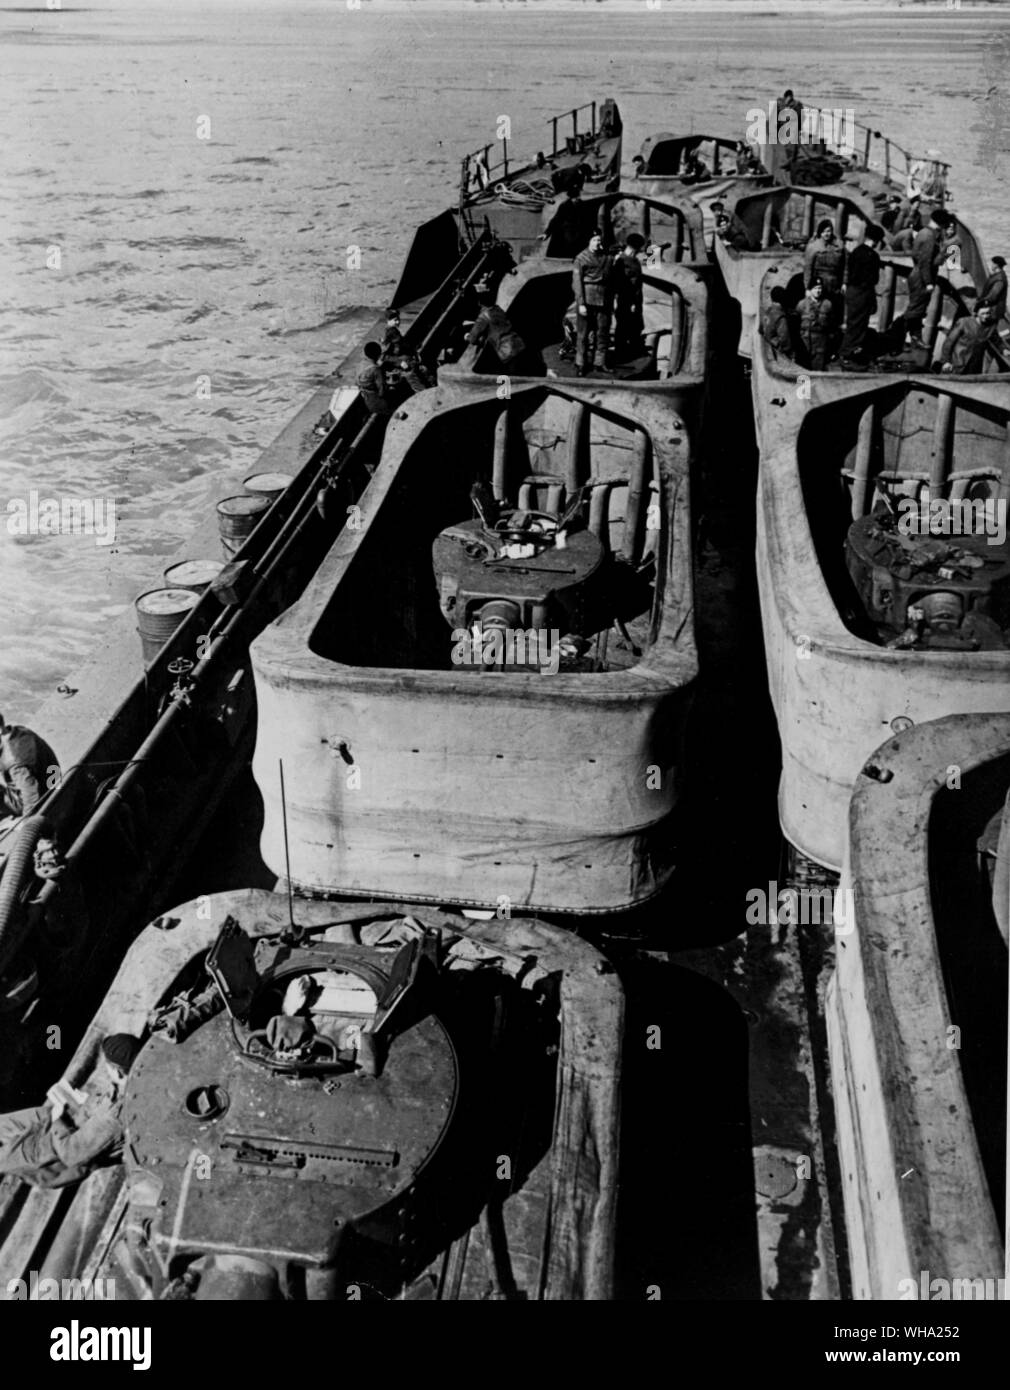 WW2: Normandy assault. Tanks on board ships nearing France. Stock Photo